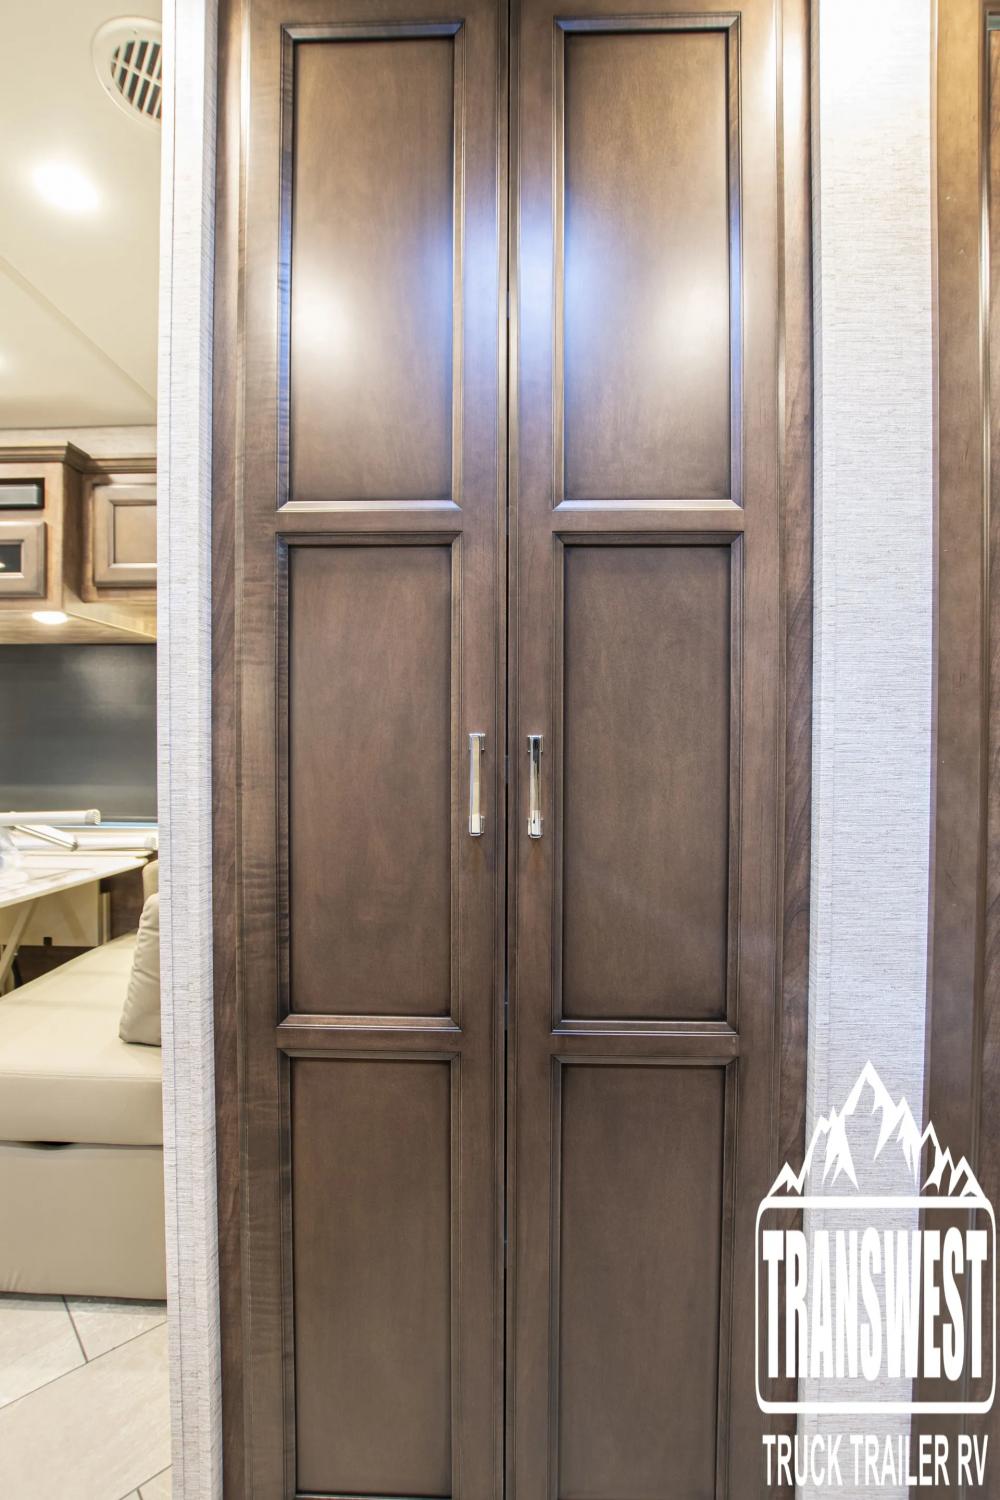 2023 Newmar Bay Star 3225 | Photo 21 of 28